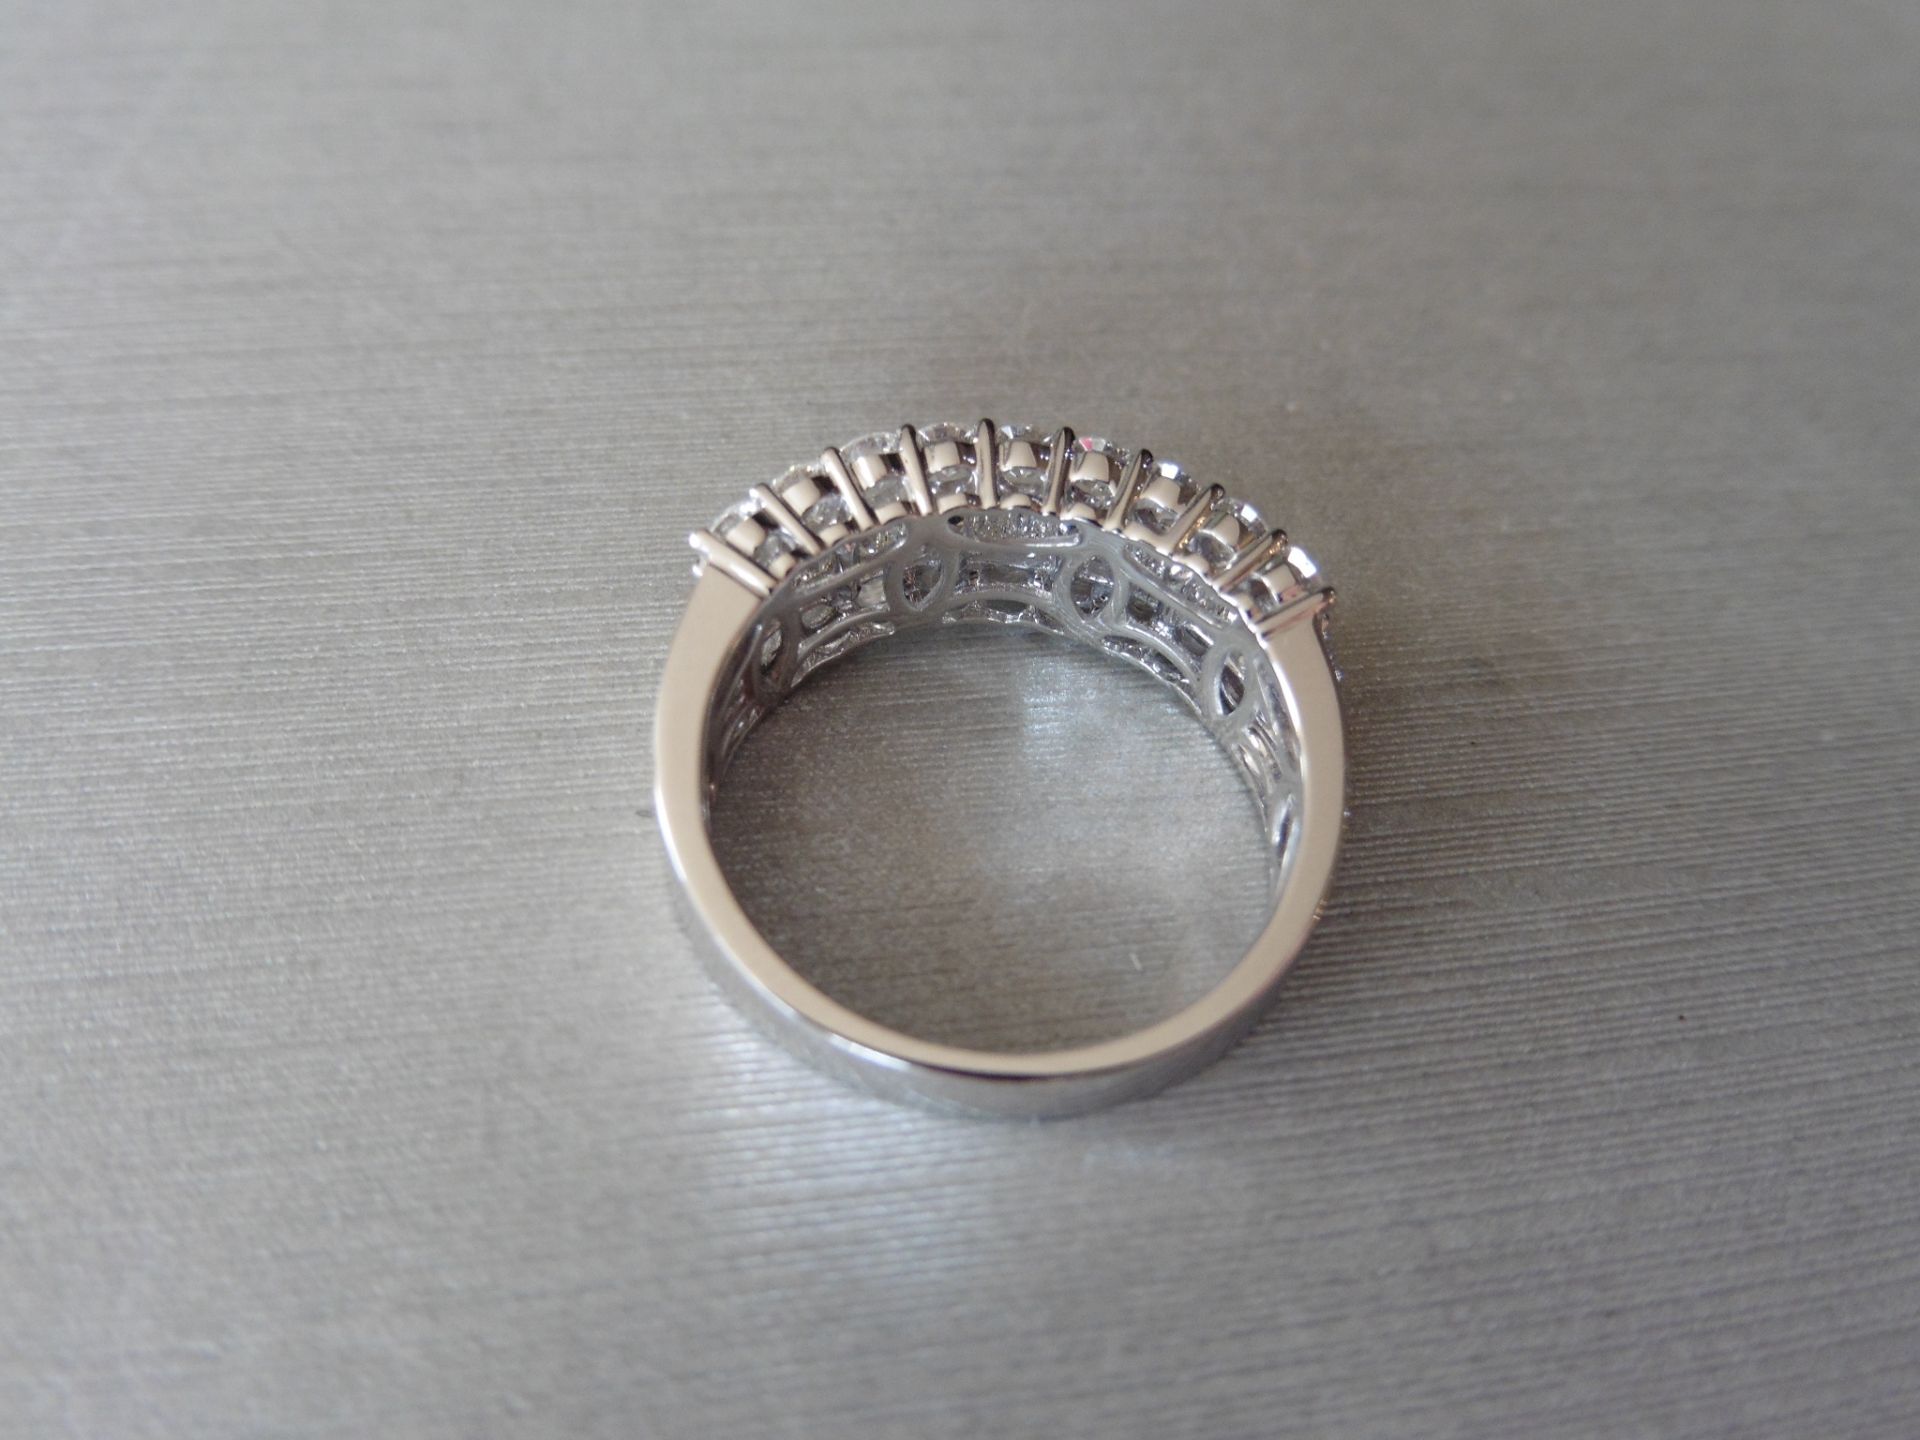 18ct white gold diamond band dress ring. Set with 3 rows of diamonds, 2 rows of brilliant cut - Image 3 of 4